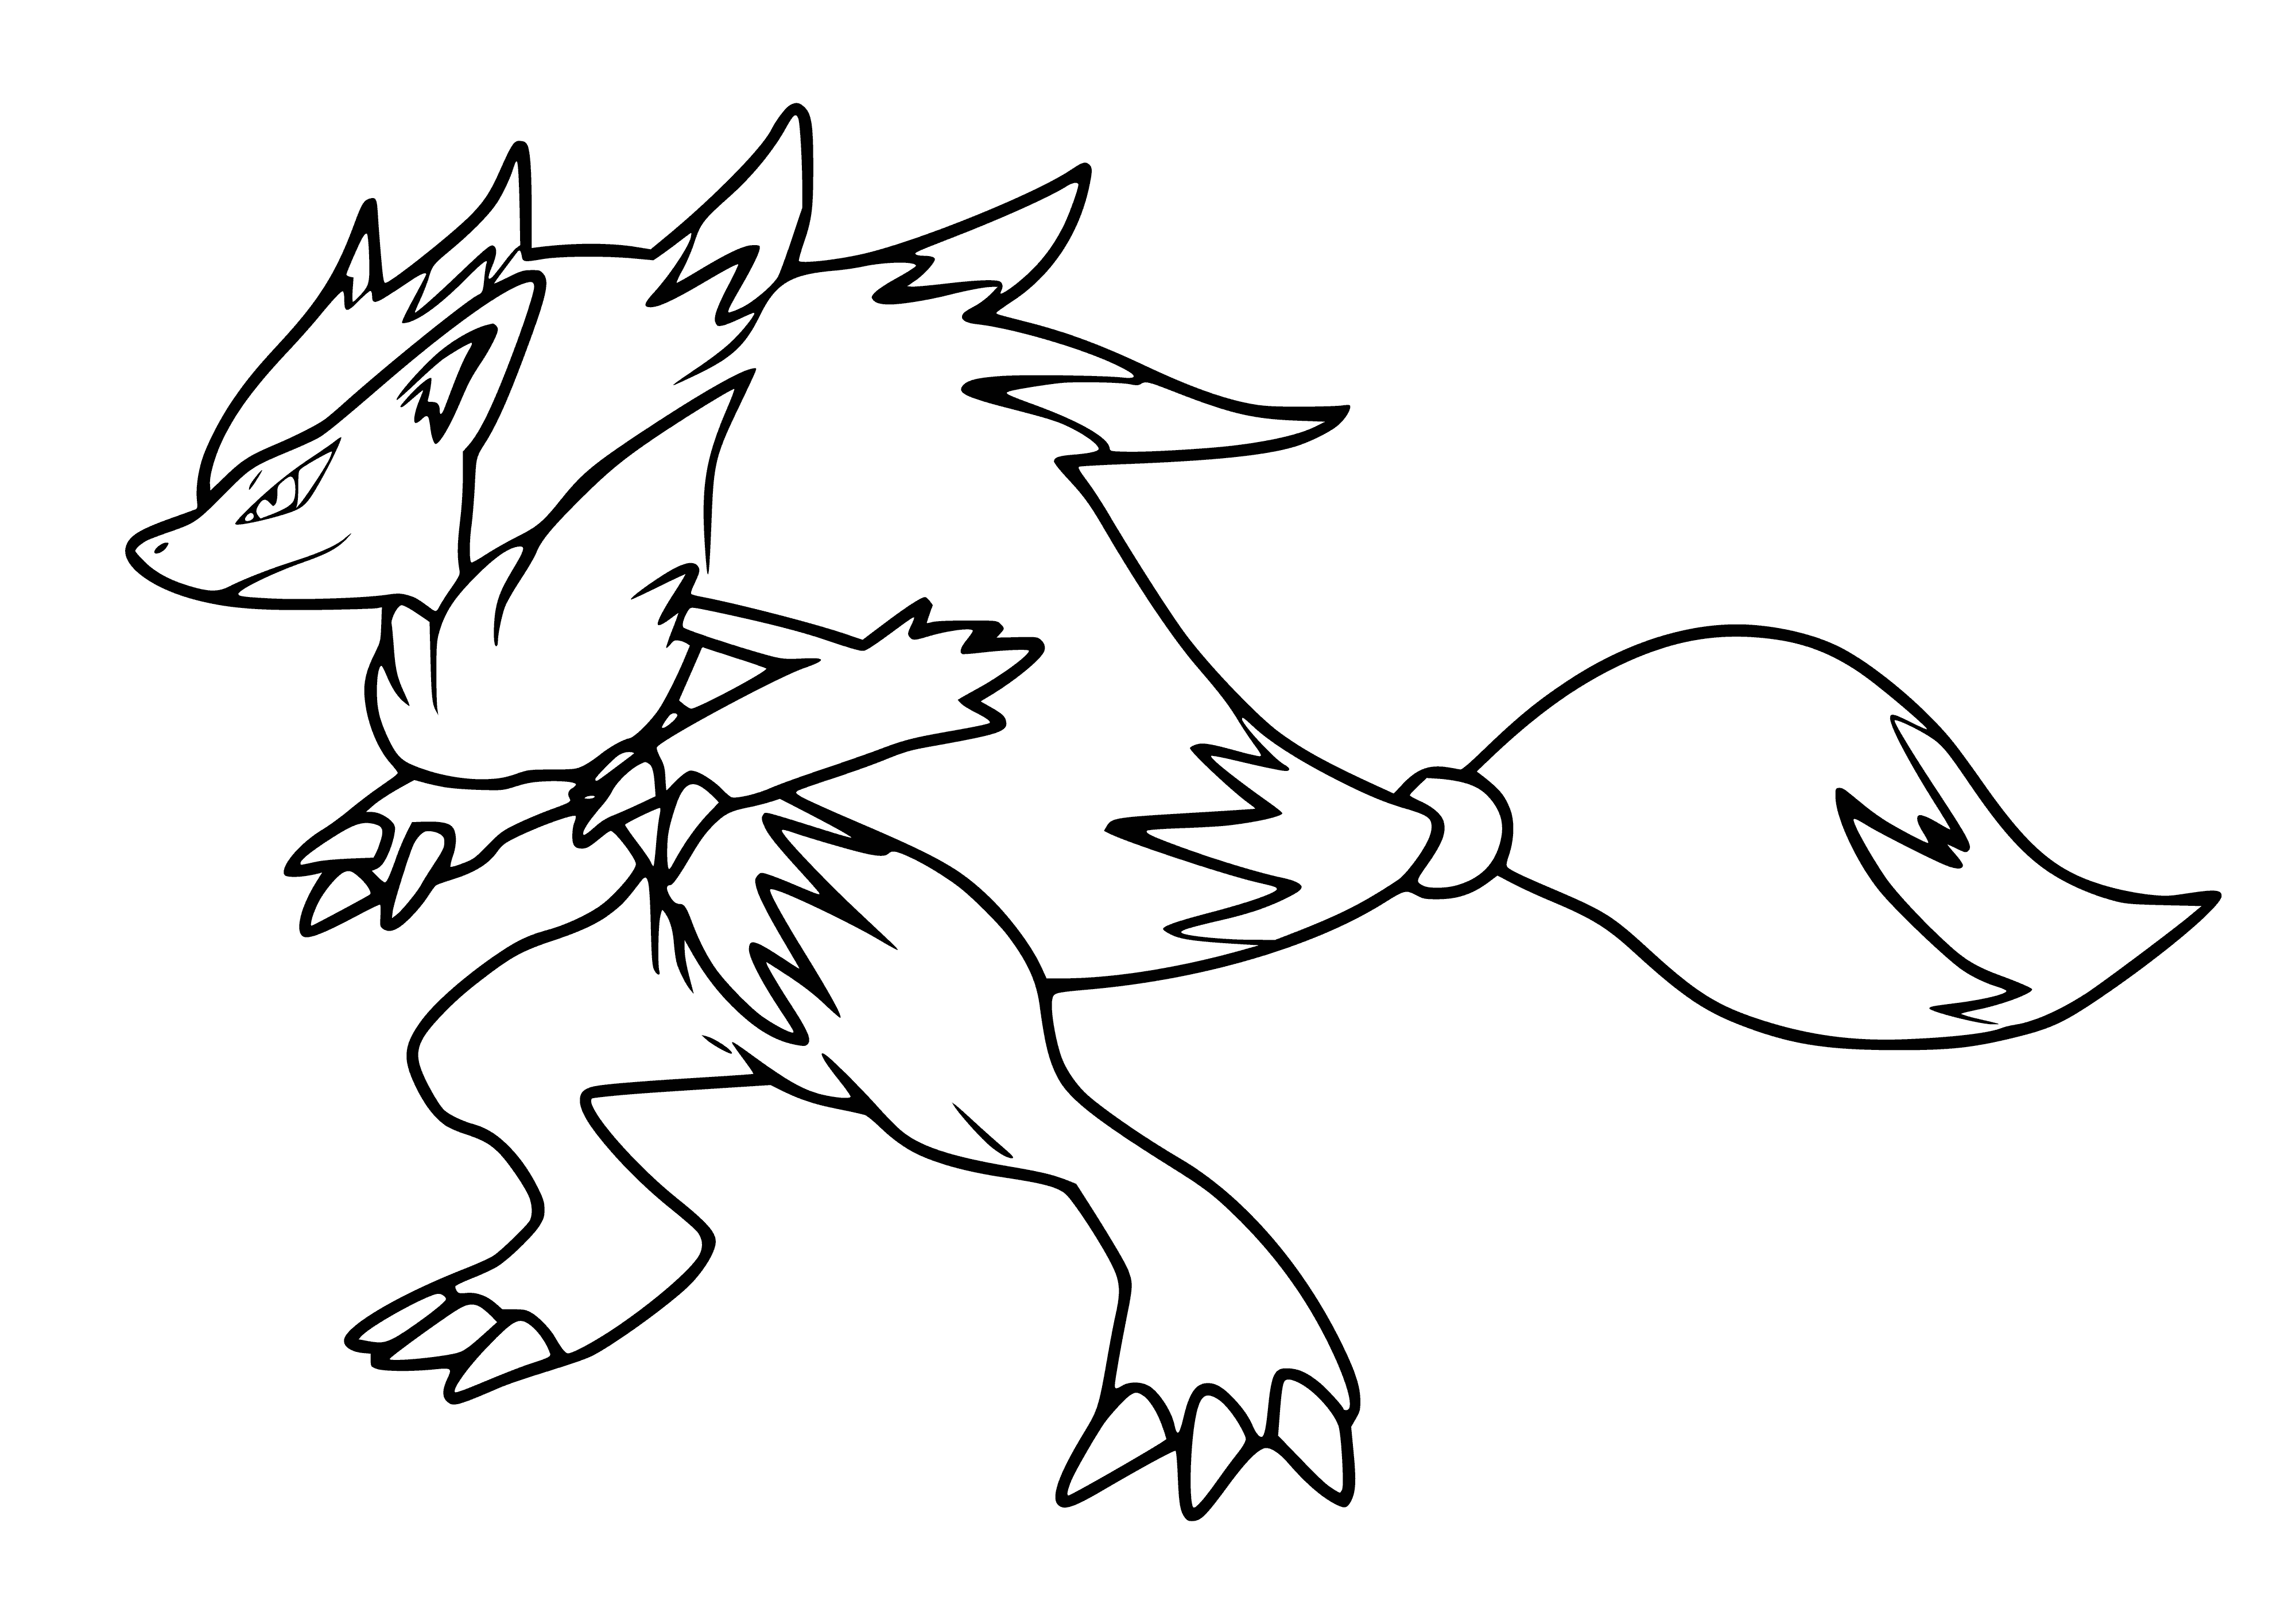 coloring page: A fox-like Pokemon w/red & yellow eyes and black/red coat. Long, fluffy tail.